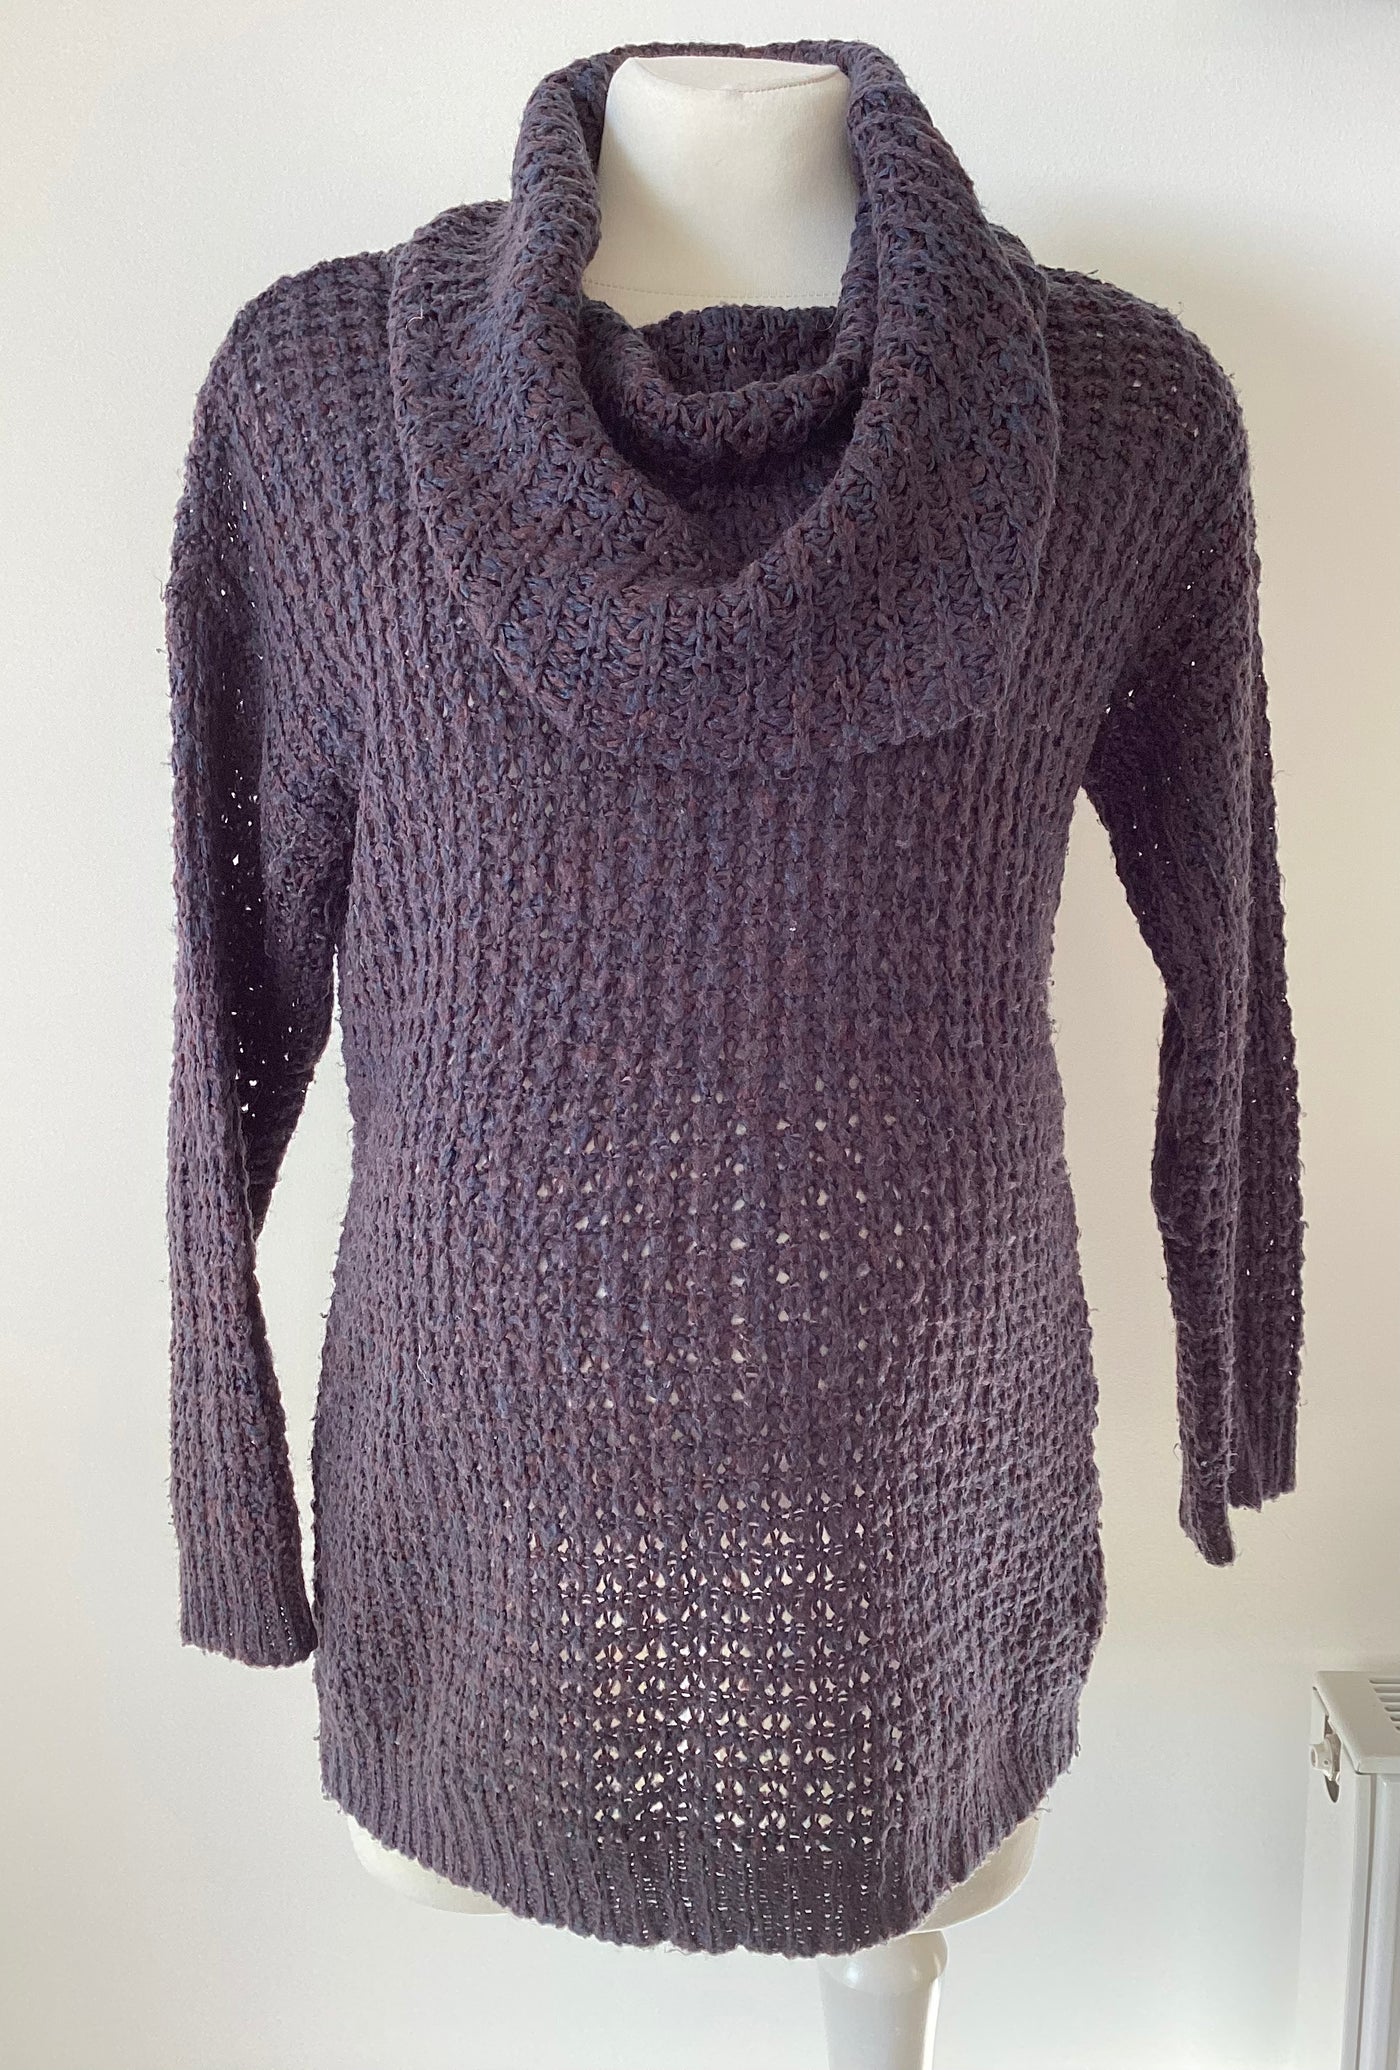 Mamalicious dark purple knitted roll neck jumper - Size M (Approx UK 10/12)